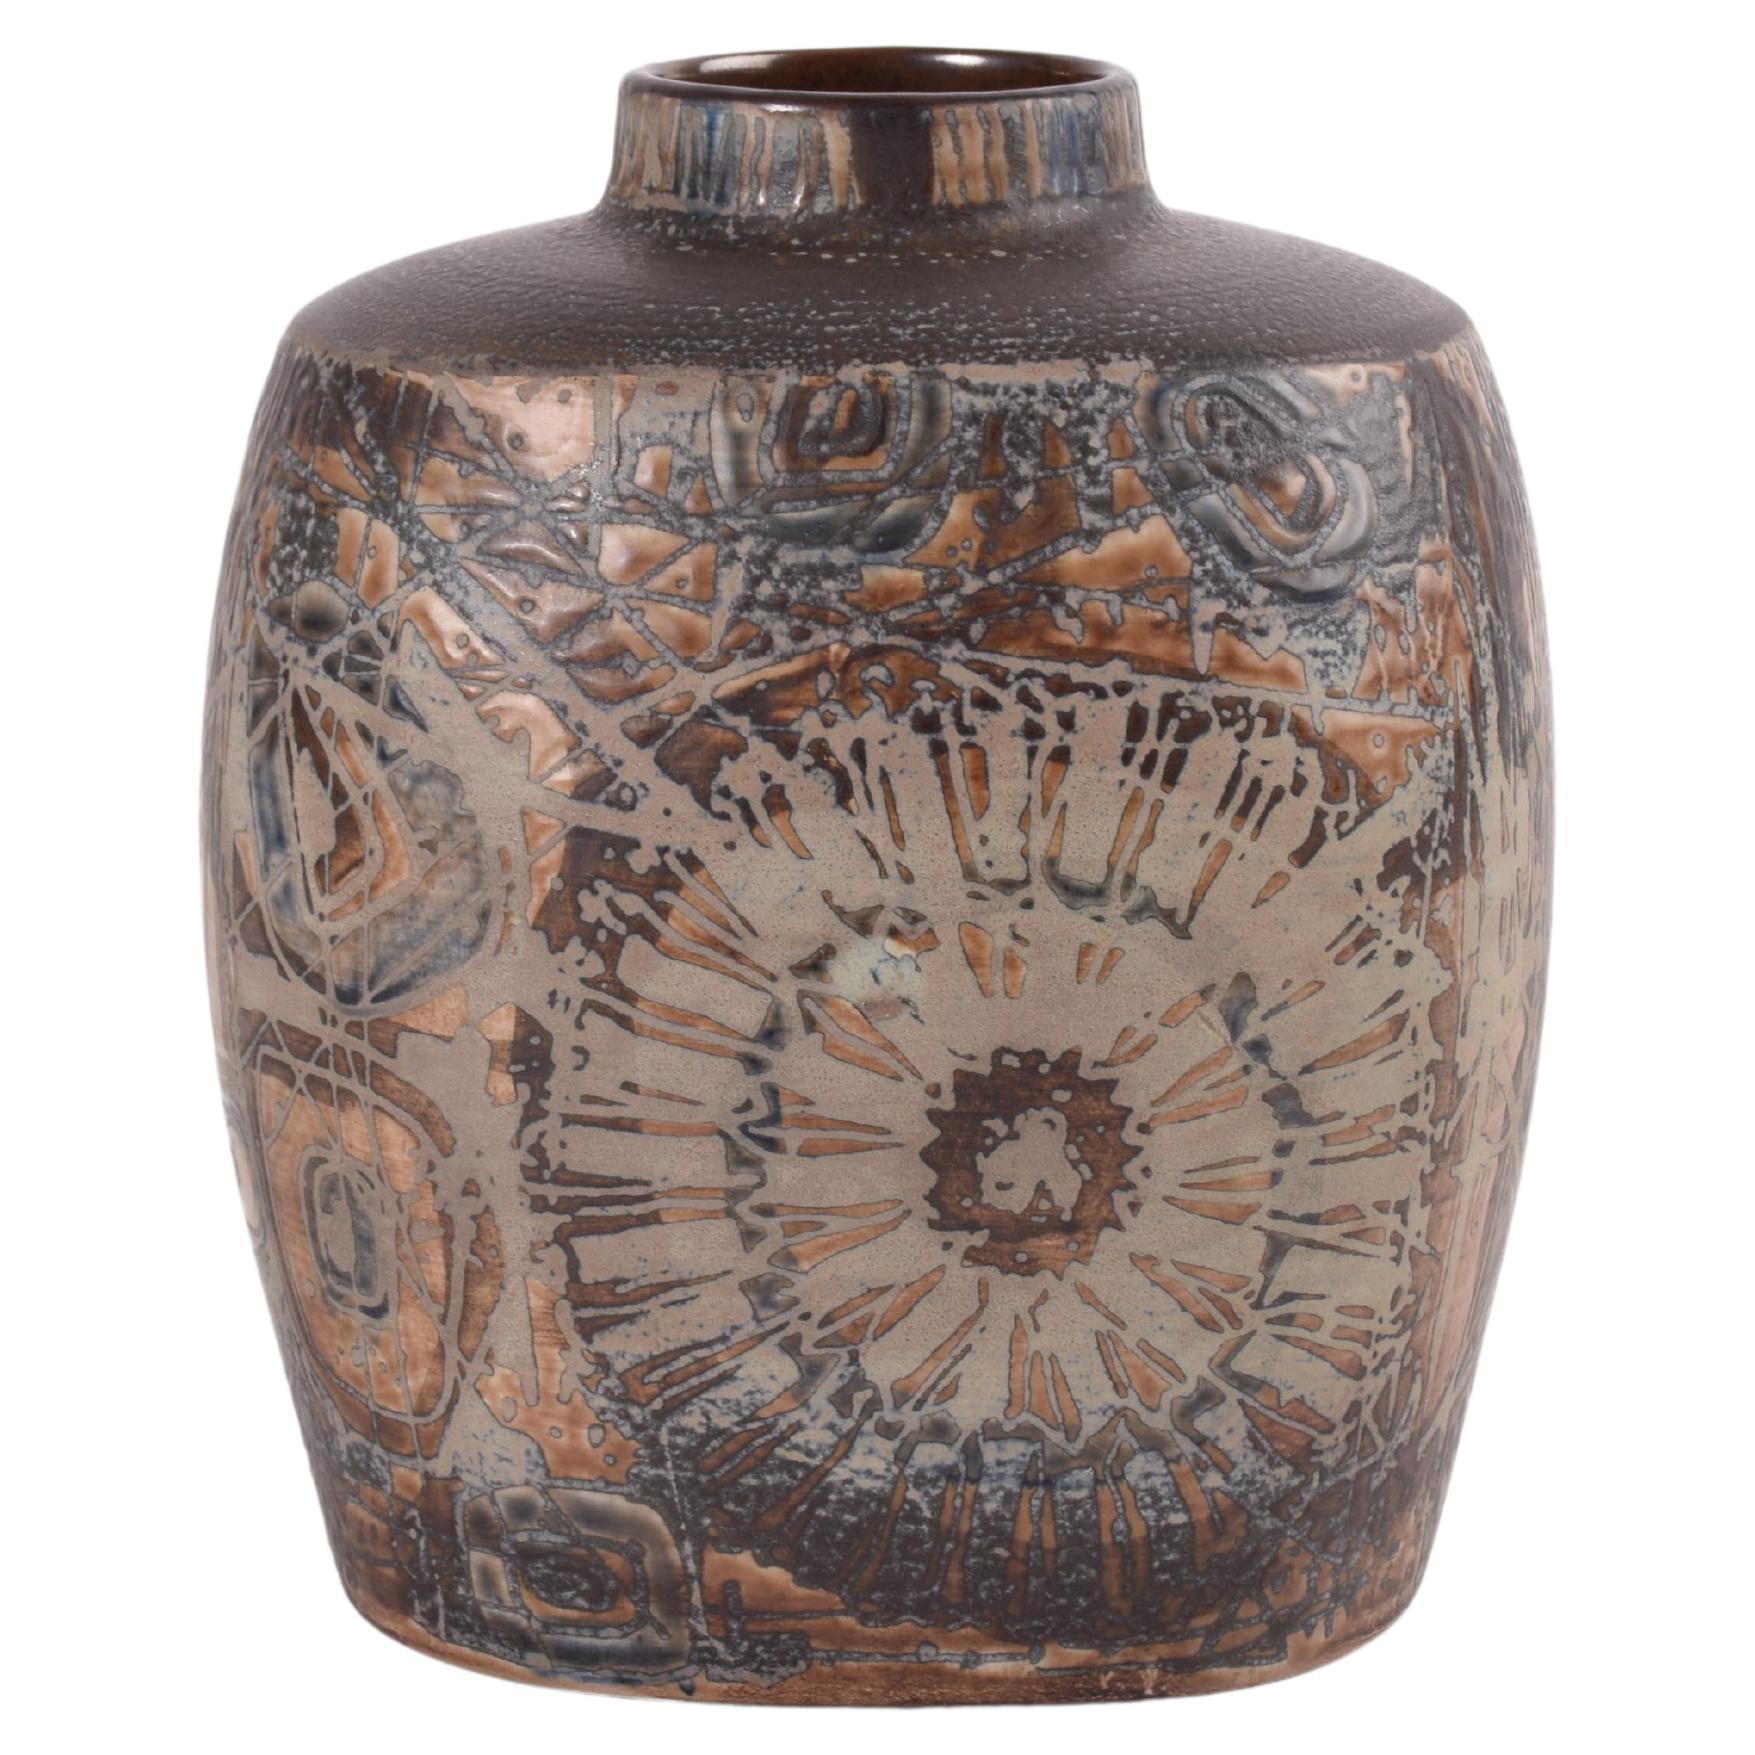 This budded vase is one of the more rare to find vases from the Royal Copenhagen 